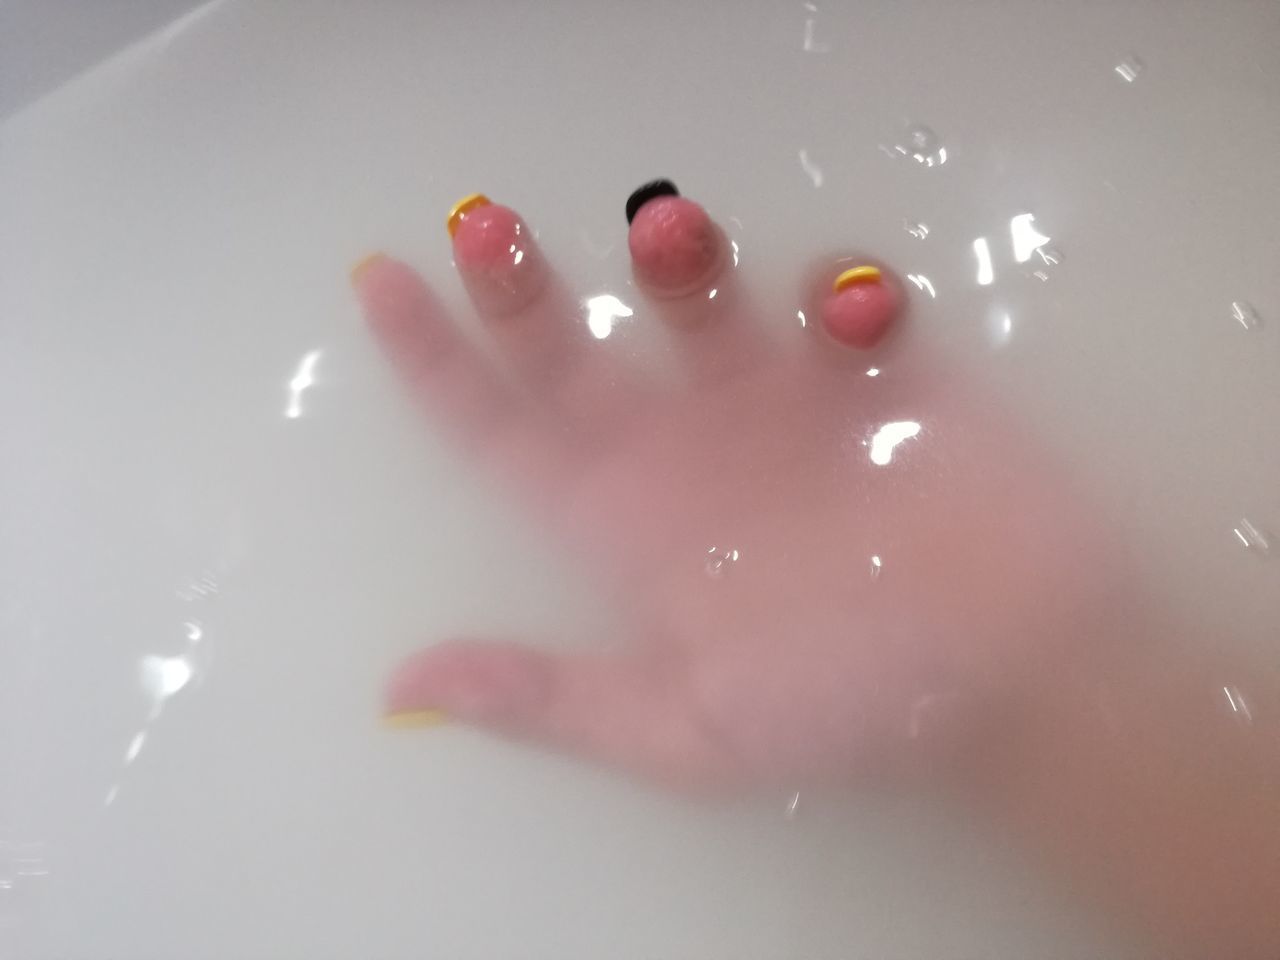 CLOSE-UP OF HANDS ON WATER